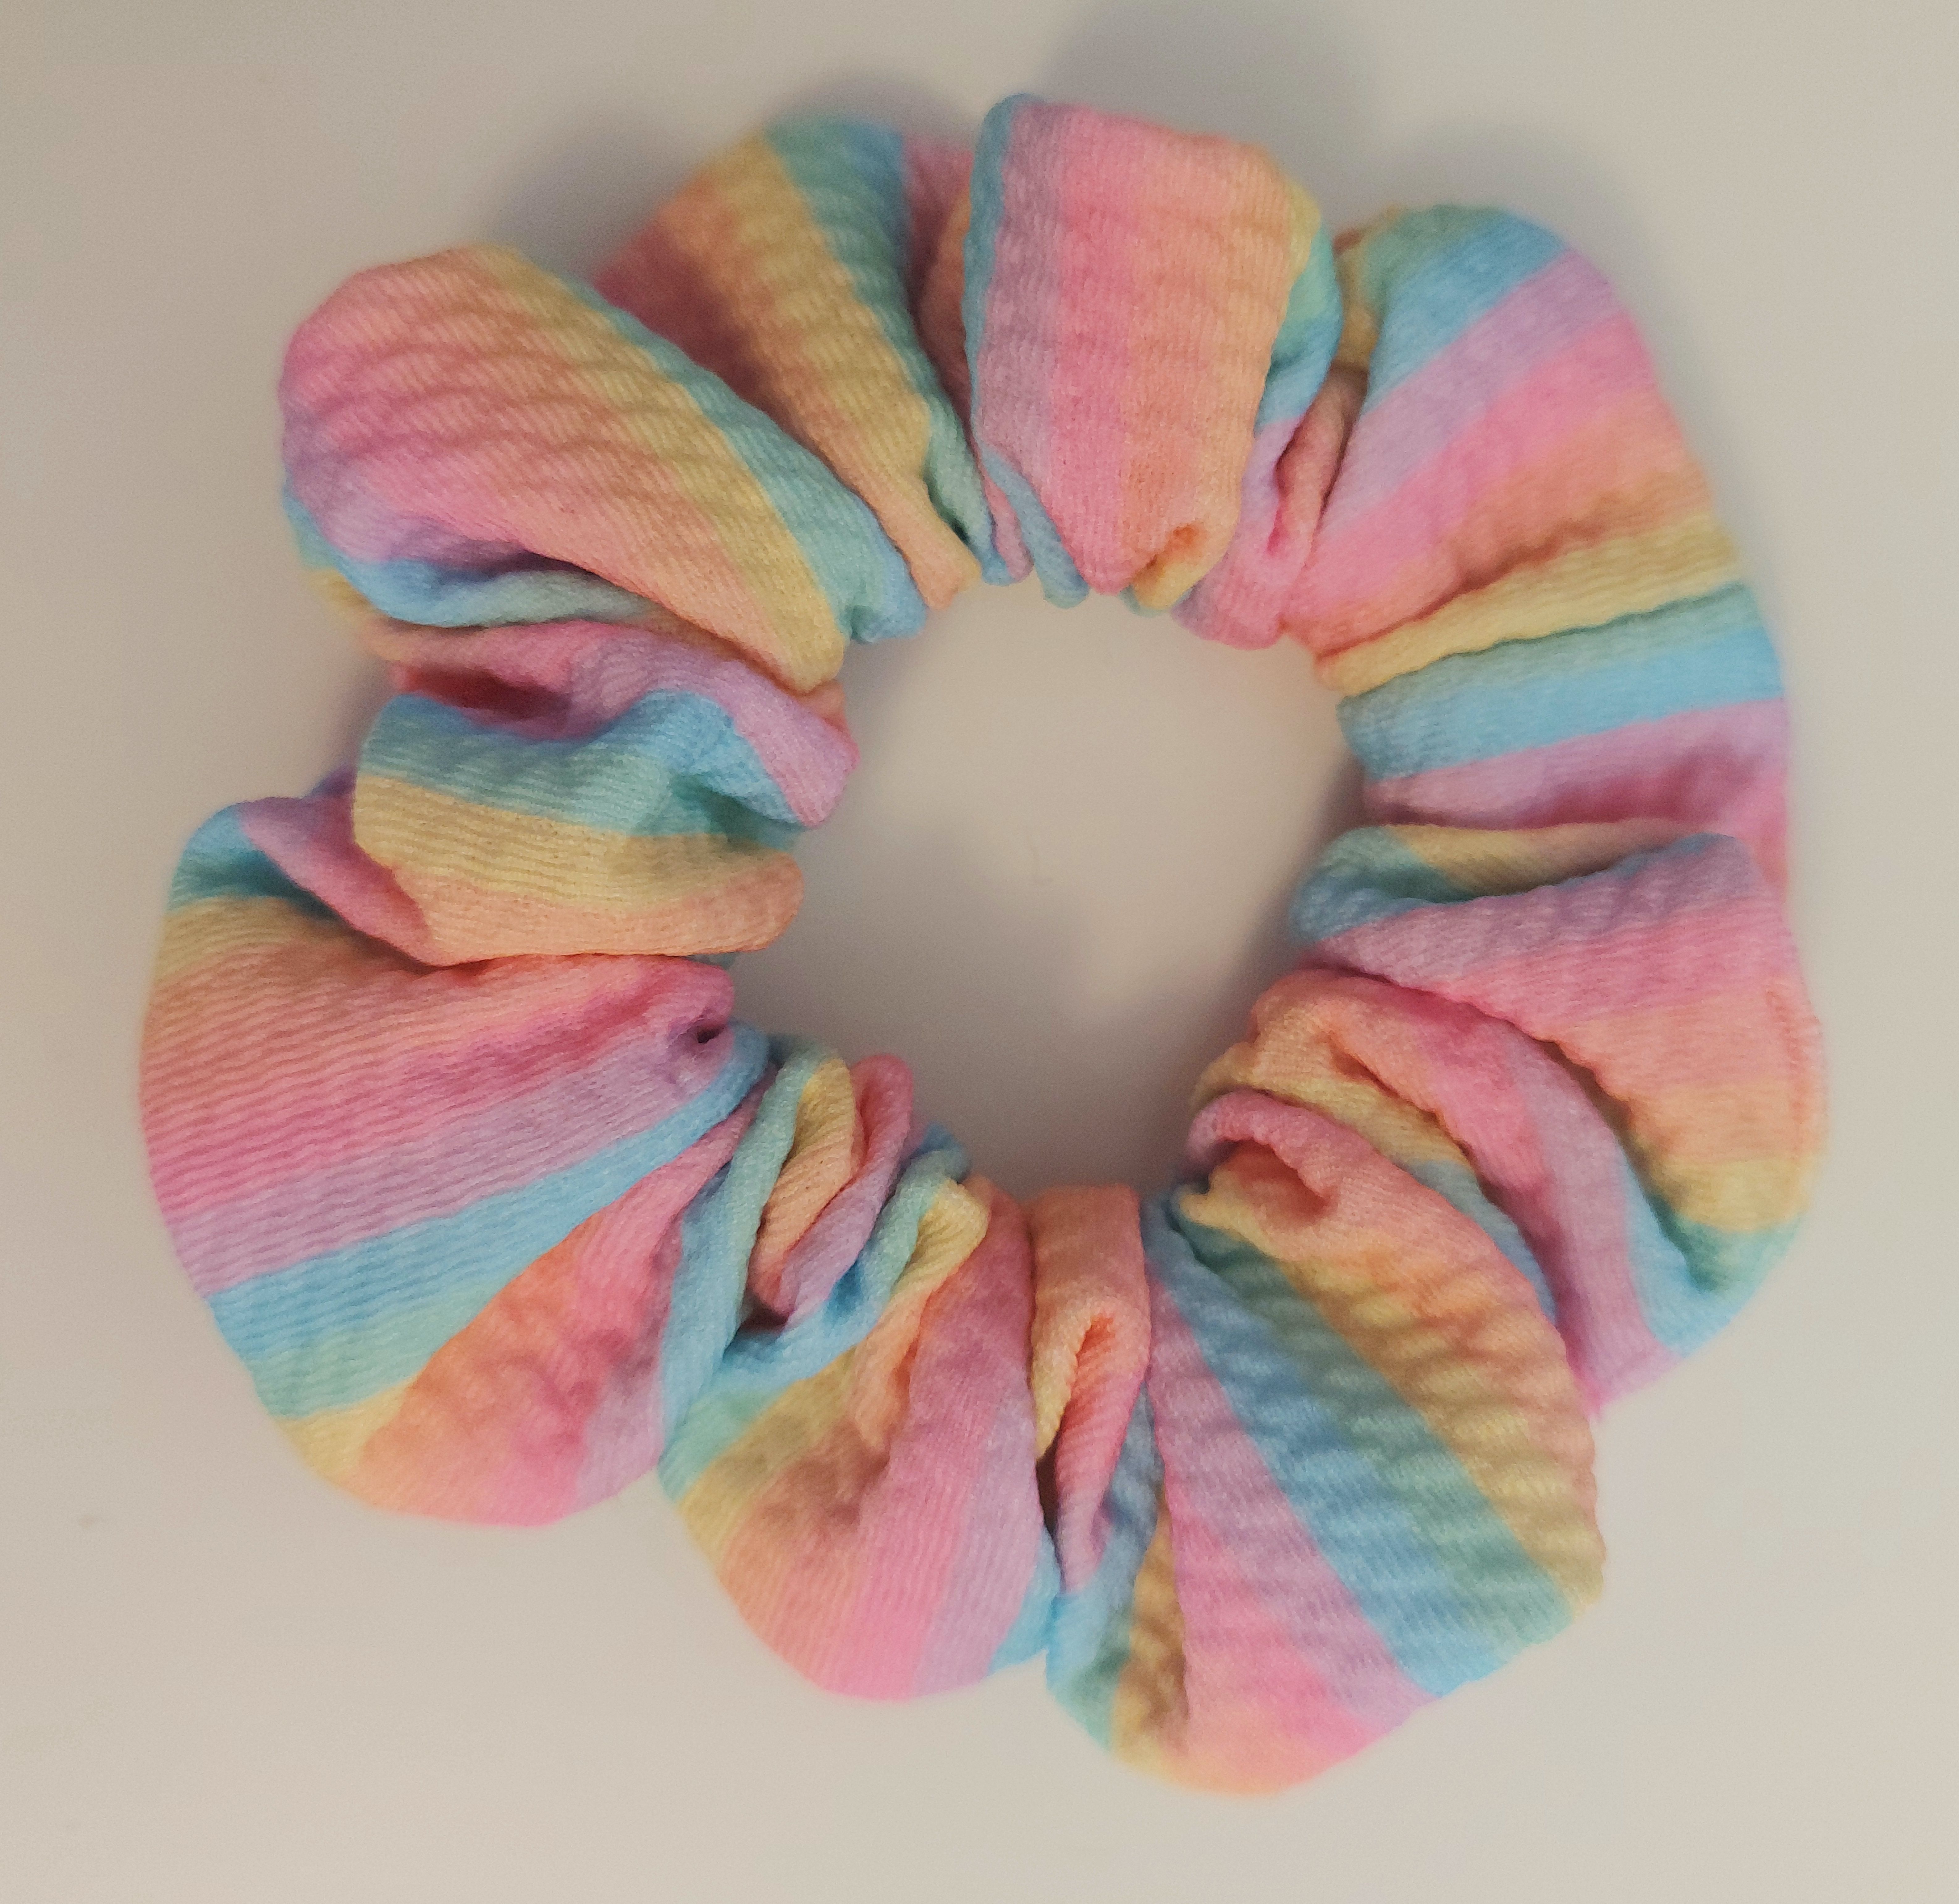 Rainbow Scrunchie for Girls, Thinner Hair or Half Ponytails in Bullet fabric.